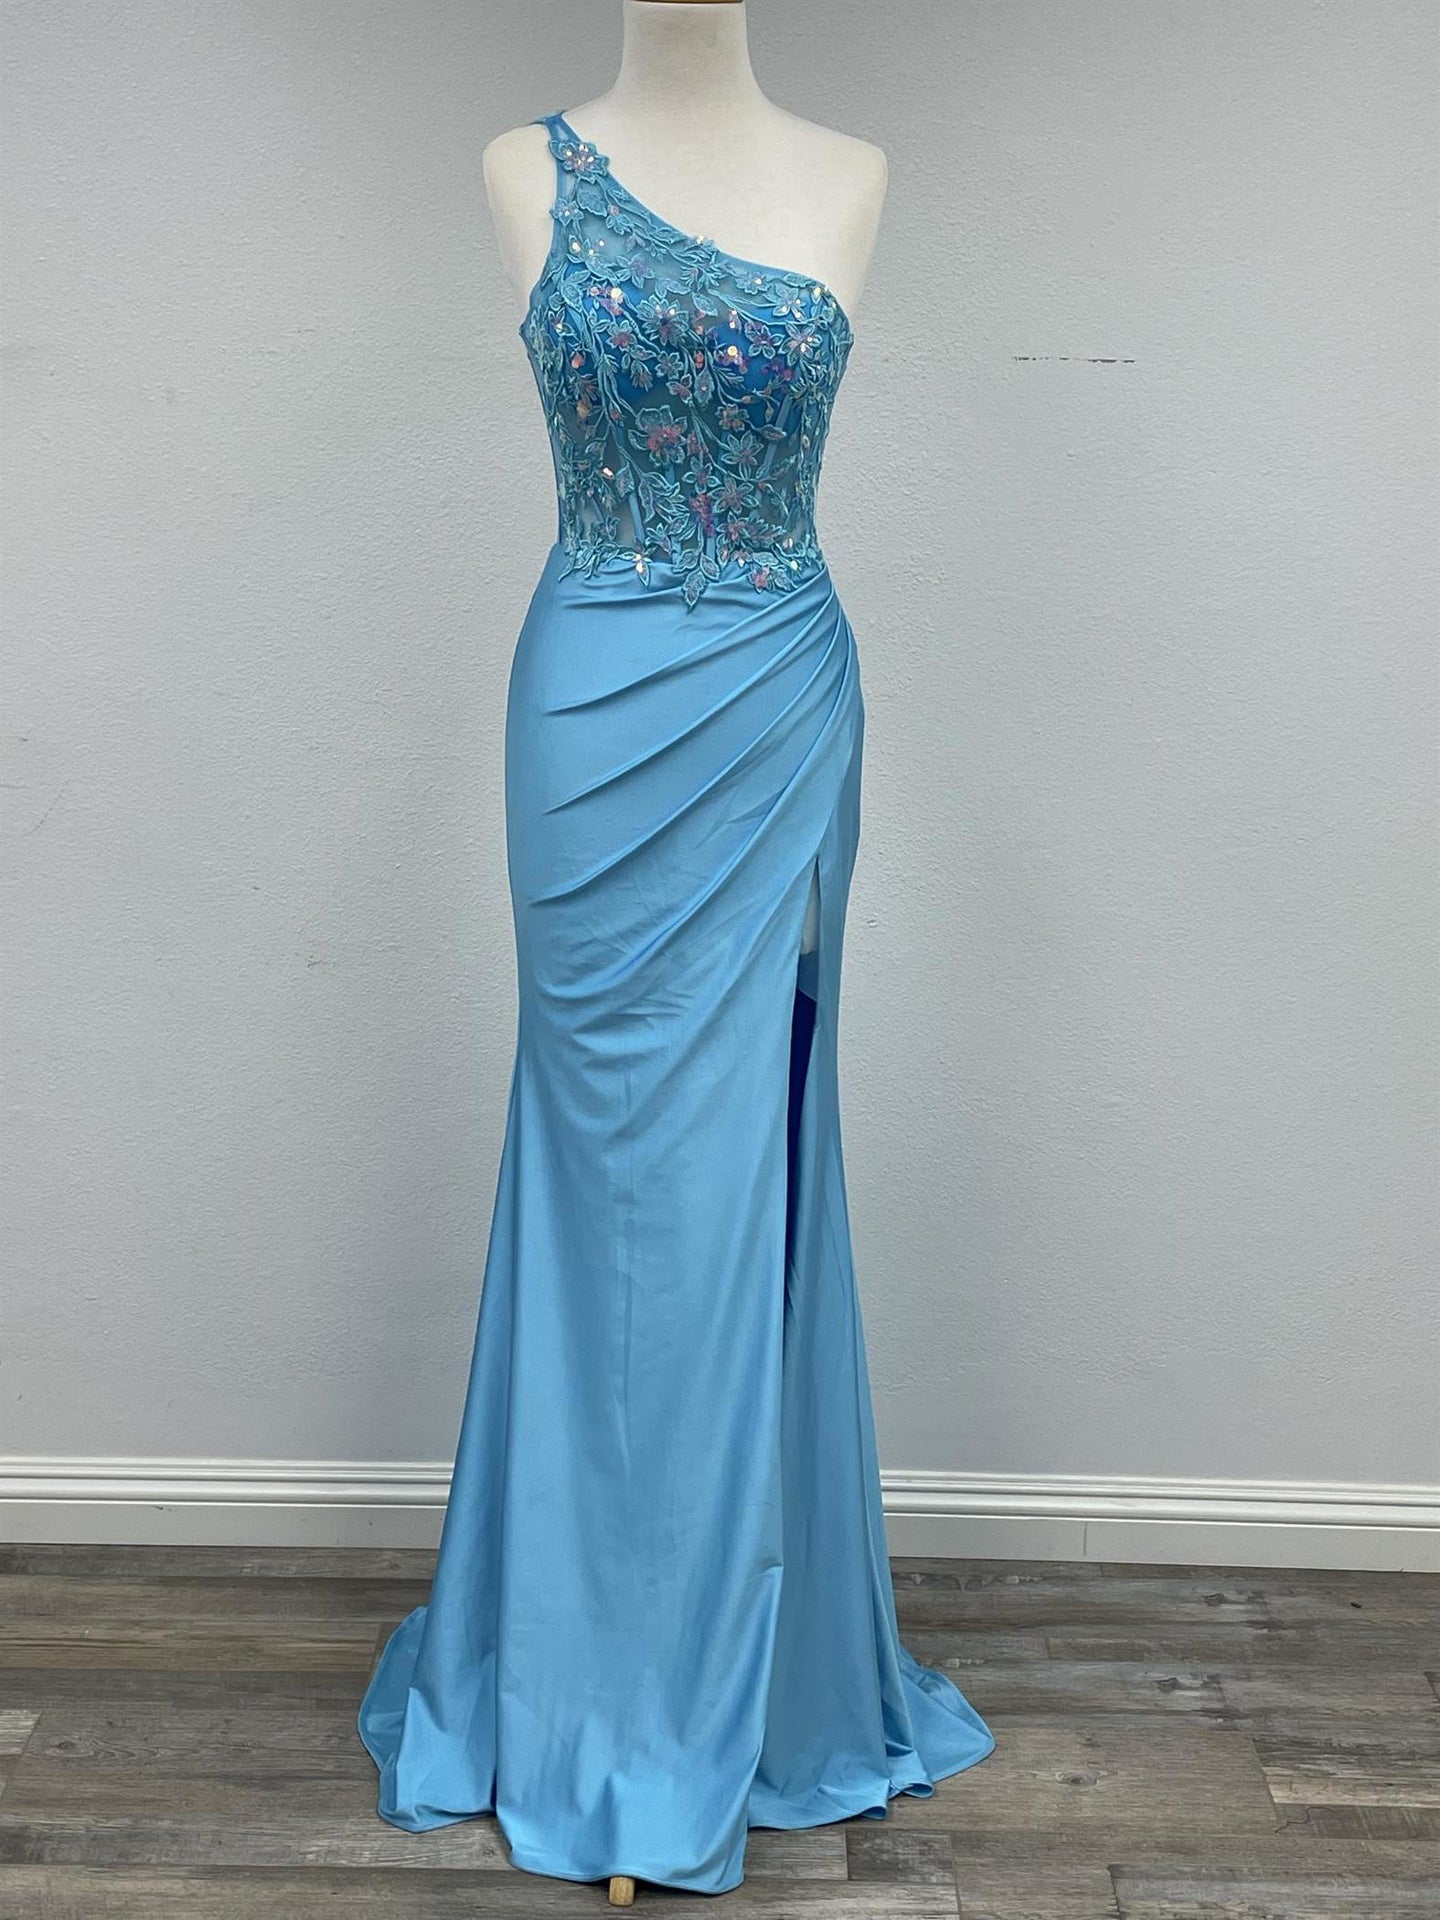 This elegant Nox Anabel A1317 dress features a sheer one shoulder design with a corset bodice and a sequin lace overlay. The fitted silhouette flatters the figure, while the slit adds a touch of sophistication. Perfect for prom or any formal occasion, this gown is sure to make a statement.